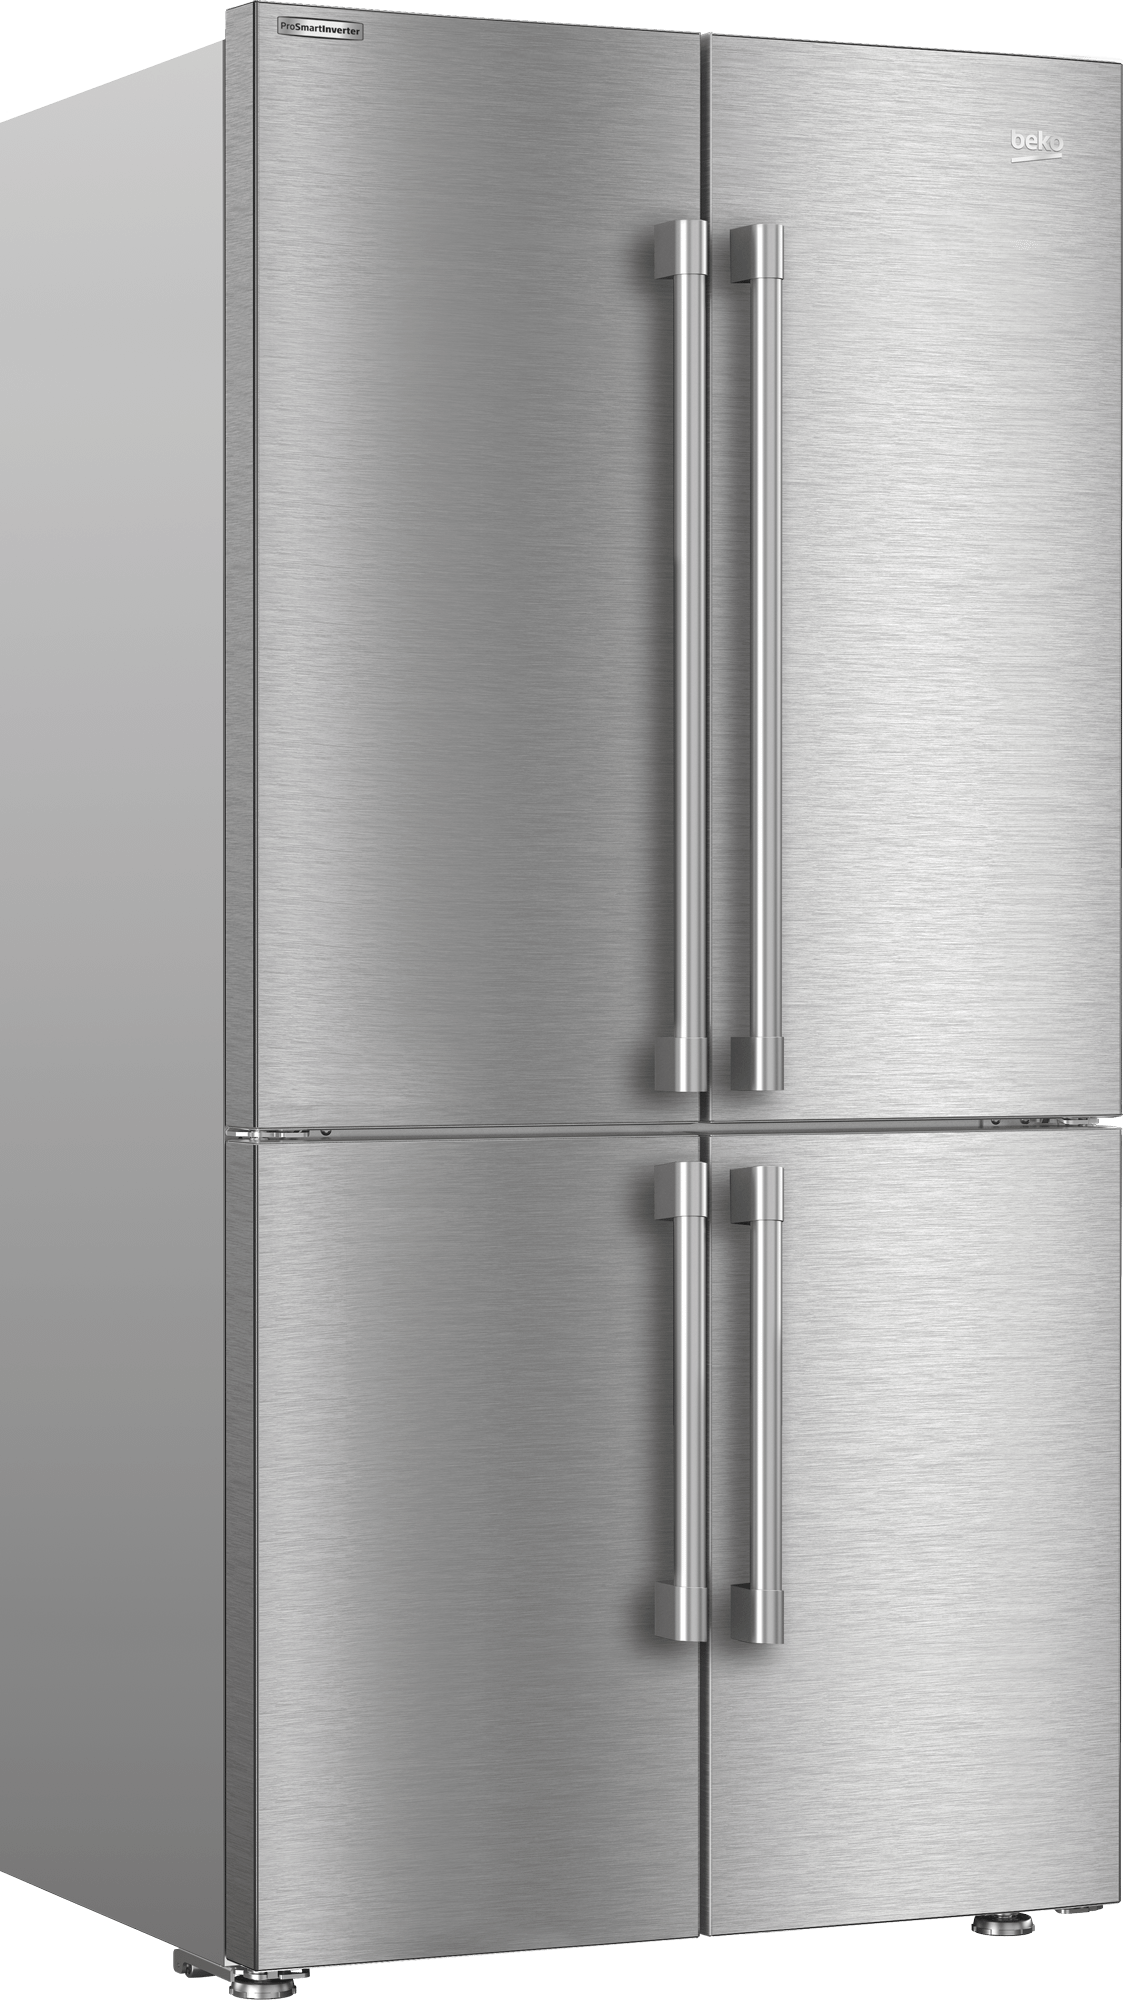 Beko 36" French Four-Door Stainless Steel Refrigerator with auto Ice Maker, Water Dispenser